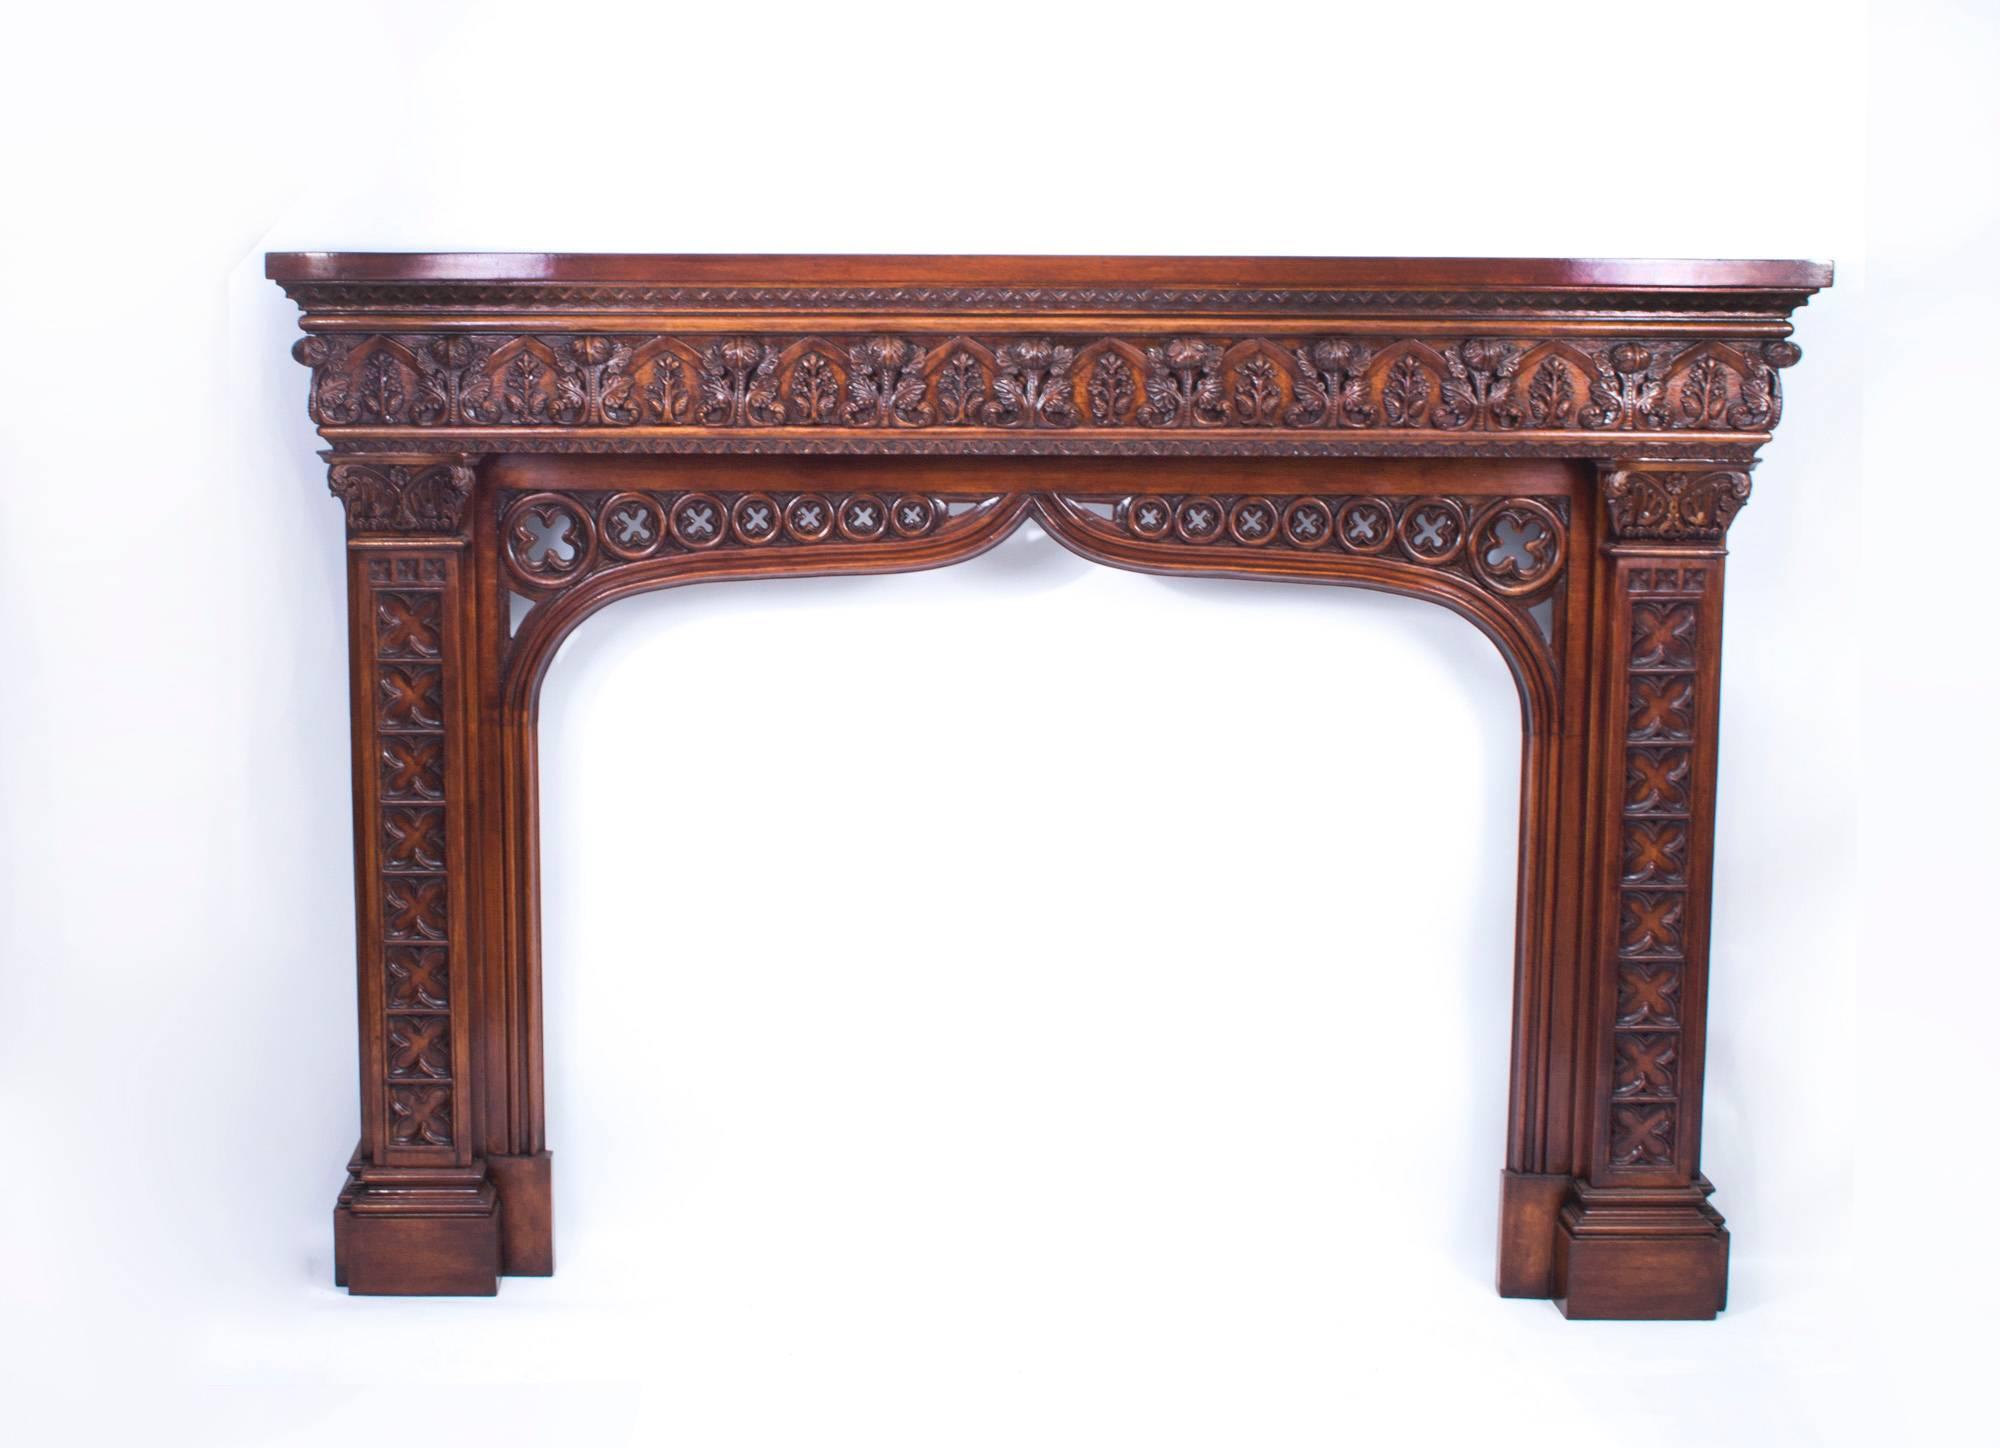 This is a large impressive and profusely carved pair of solid mahogany chimney pieces in the neo Gothic style of A. W. N Pugin, dating from the early 20th century.

Each has a contoured shelf over Puginesque foliate carved decoration with an open